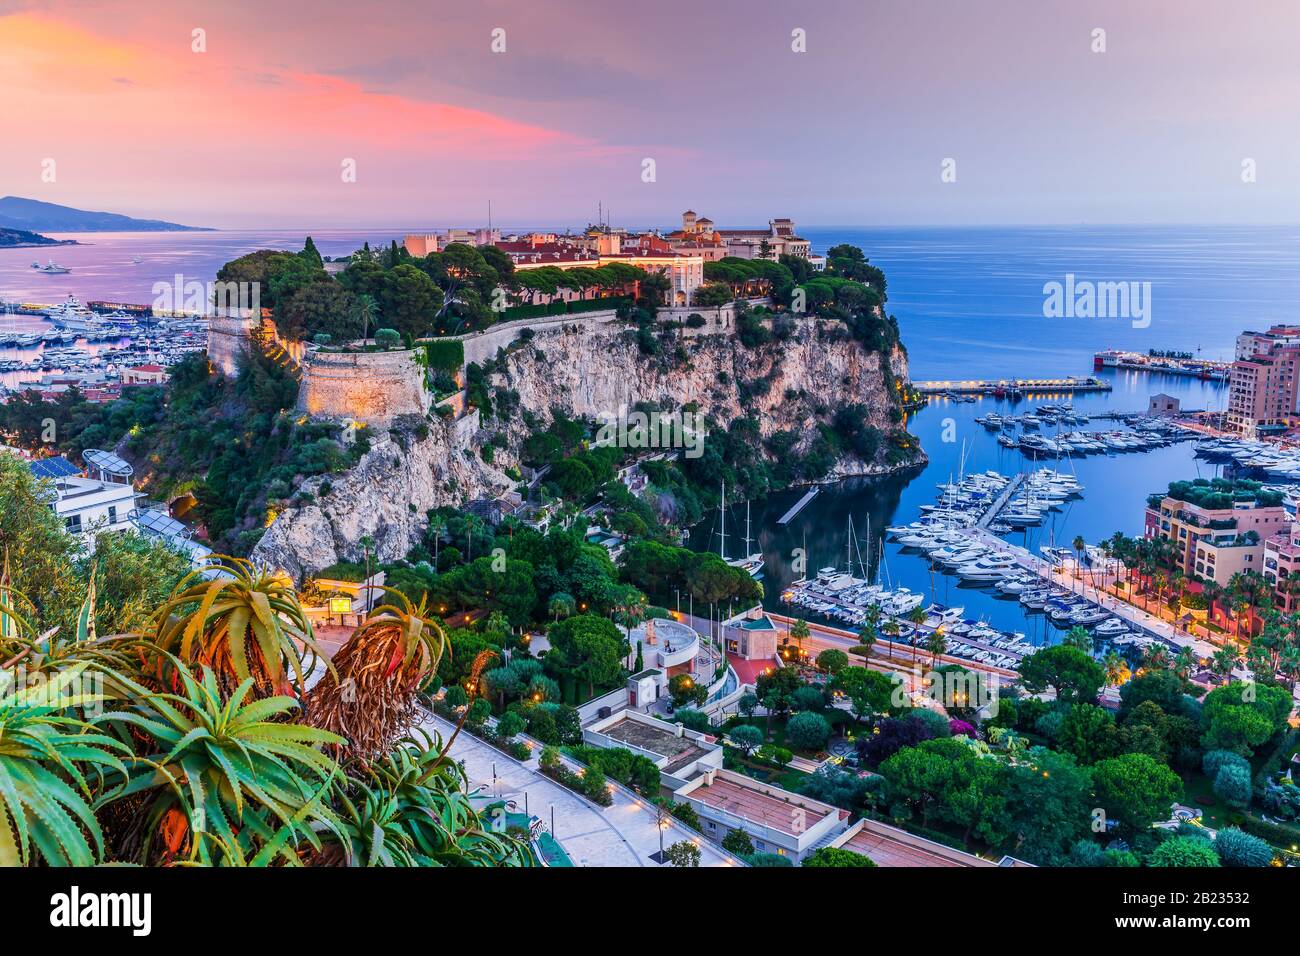 Monaco. Panoramic view of prince's palace and old town in Monte Carlo. Stock Photo